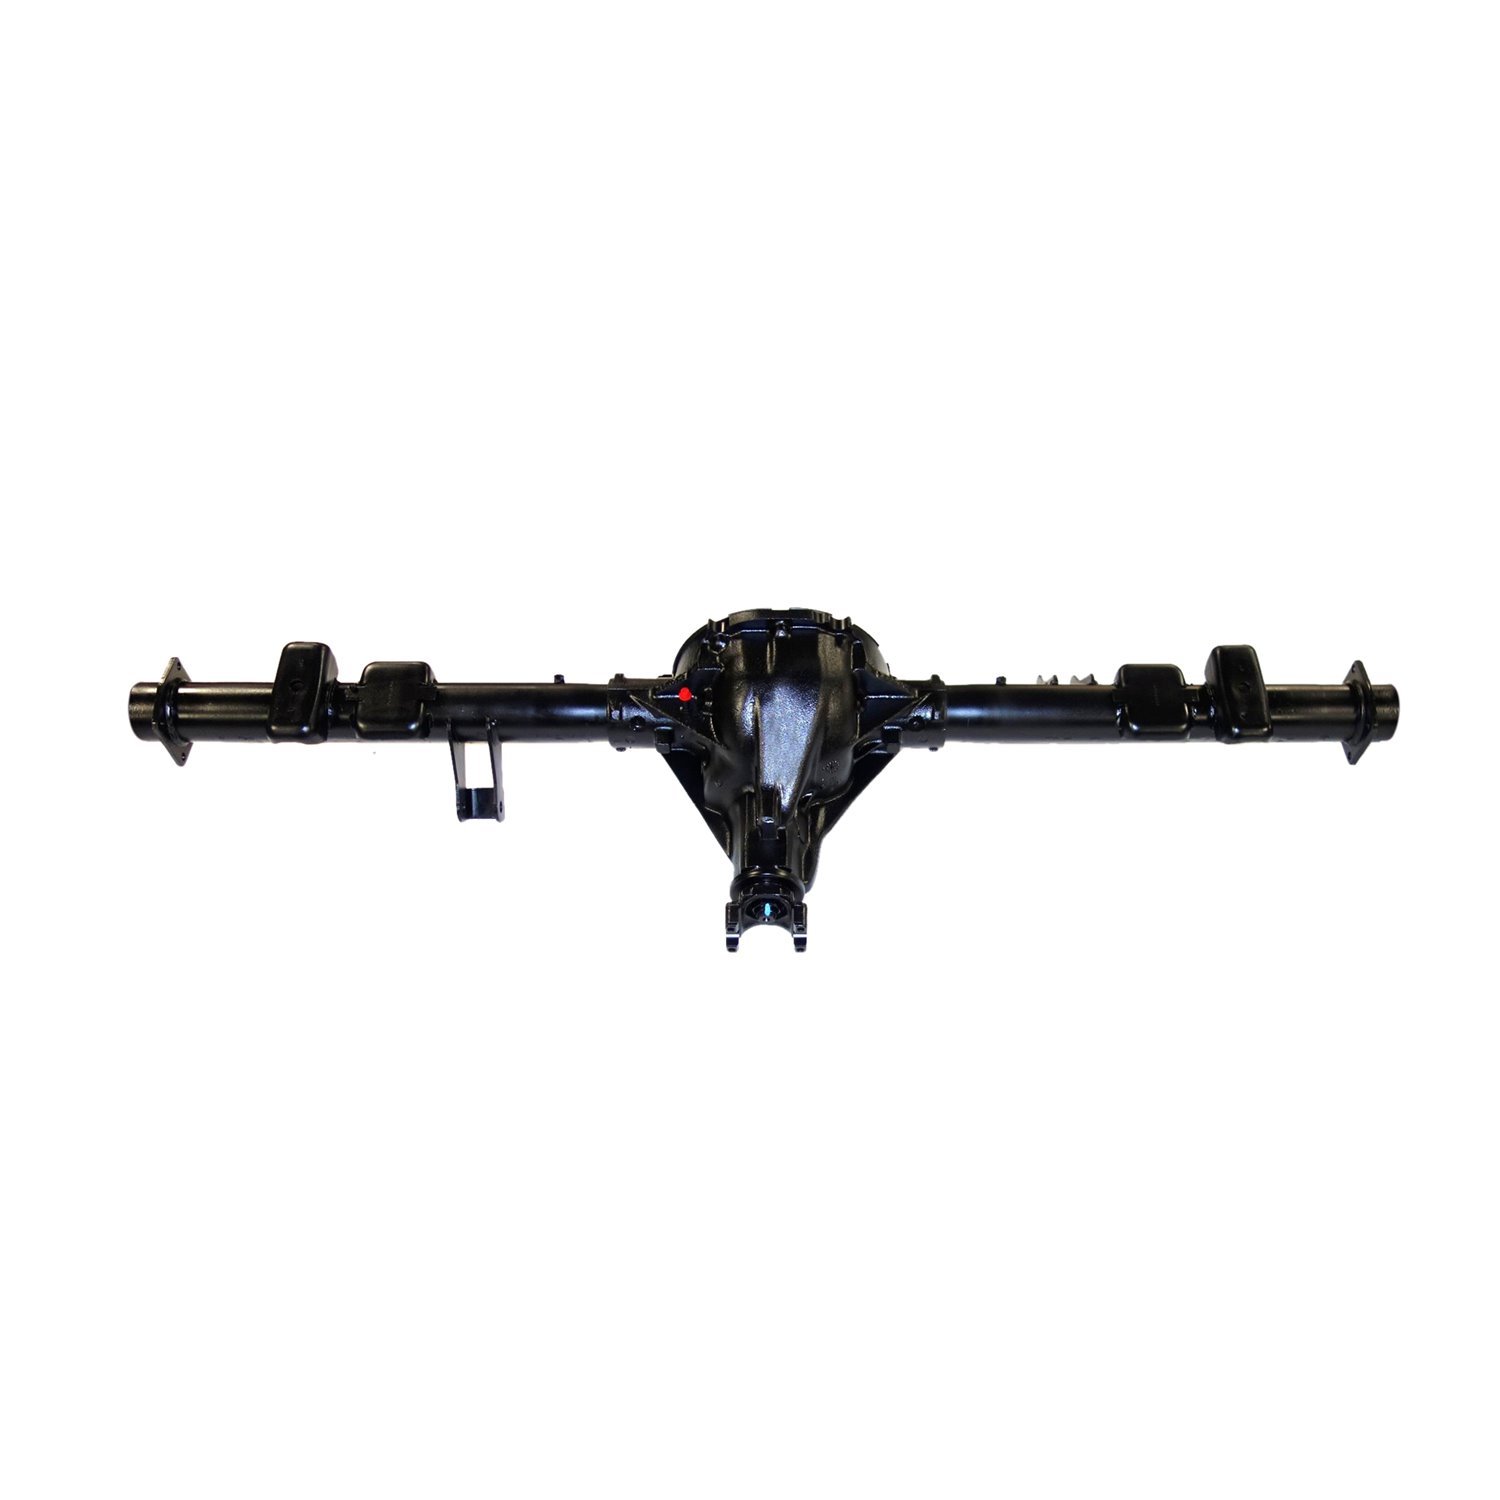 Remanufactured Axle Assy for GM 8.5" 1995 Chevy Tahoe & GMC Yukon 3.08 , 2wd, 2dr